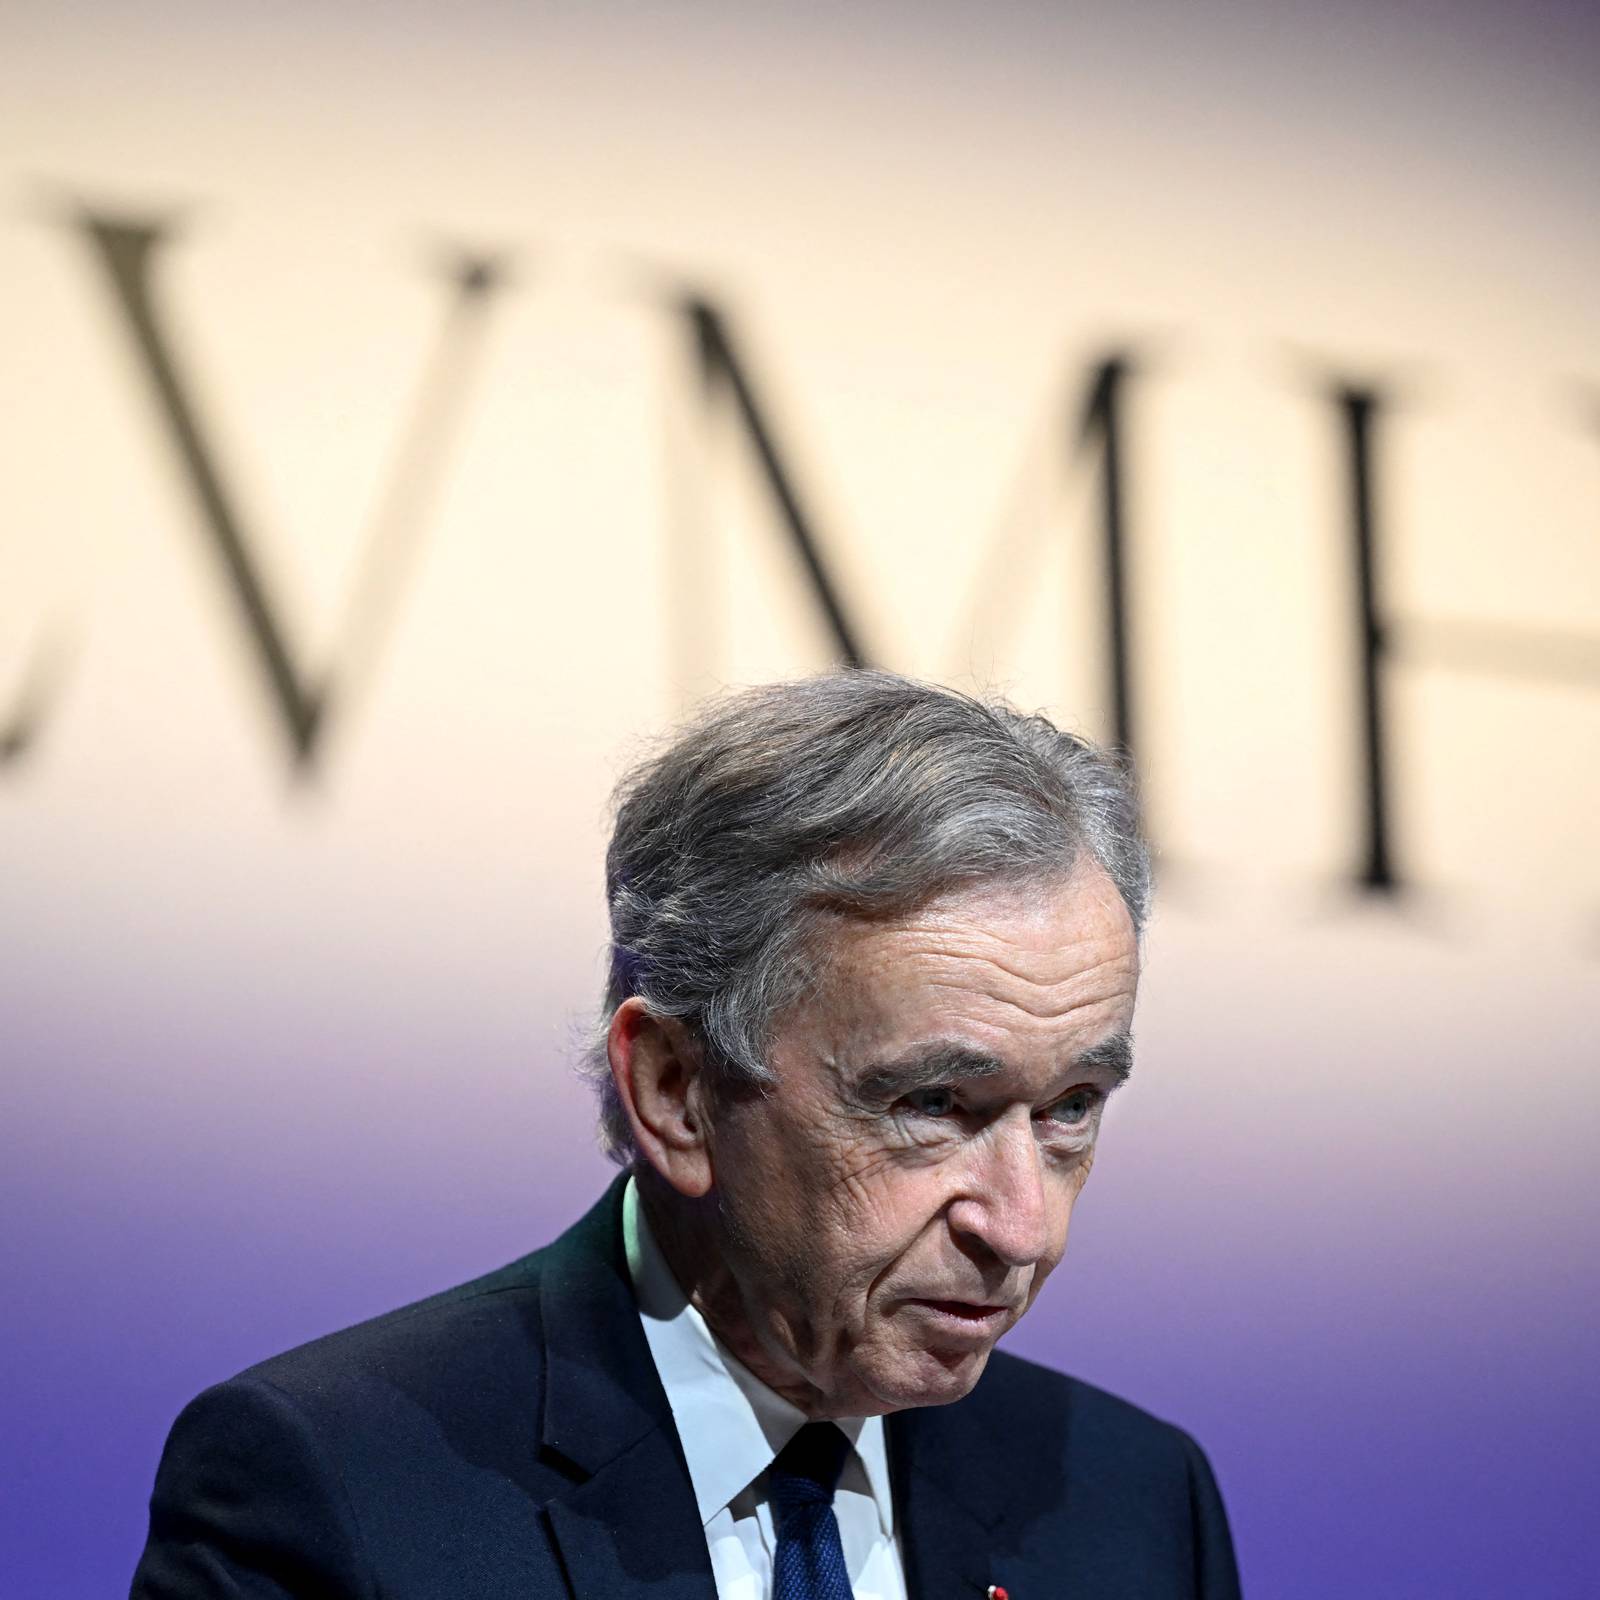 LVMH becomes first European company to surpass $500bn